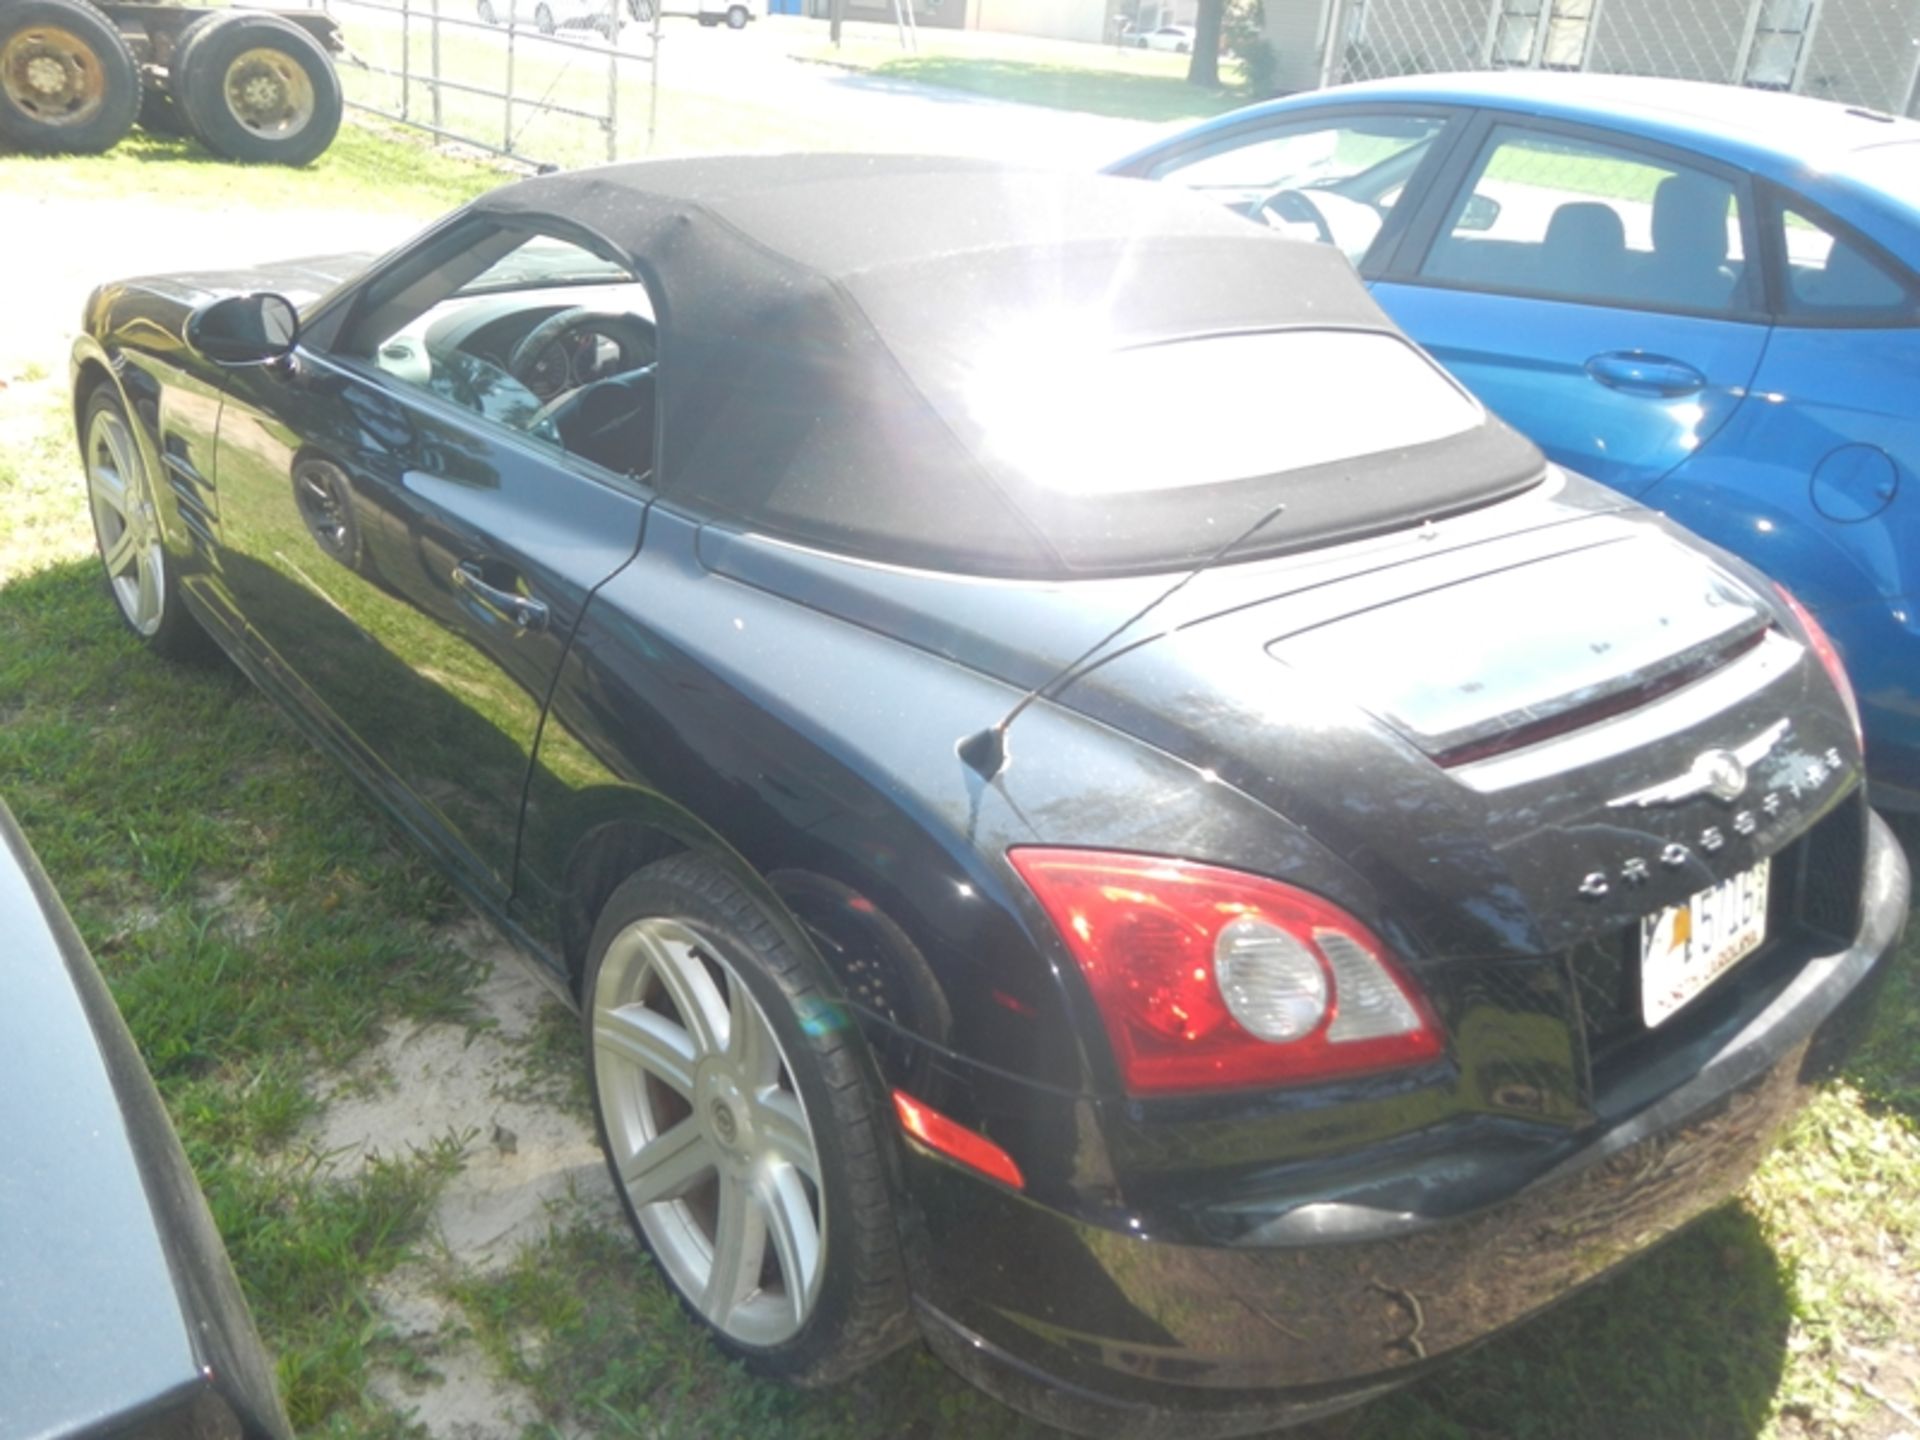 2006 CHRYSLER Crossfire convertible, sport, manual trans, VIN 1C3AN55636X064835 - 205,054 miles - Image 4 of 5